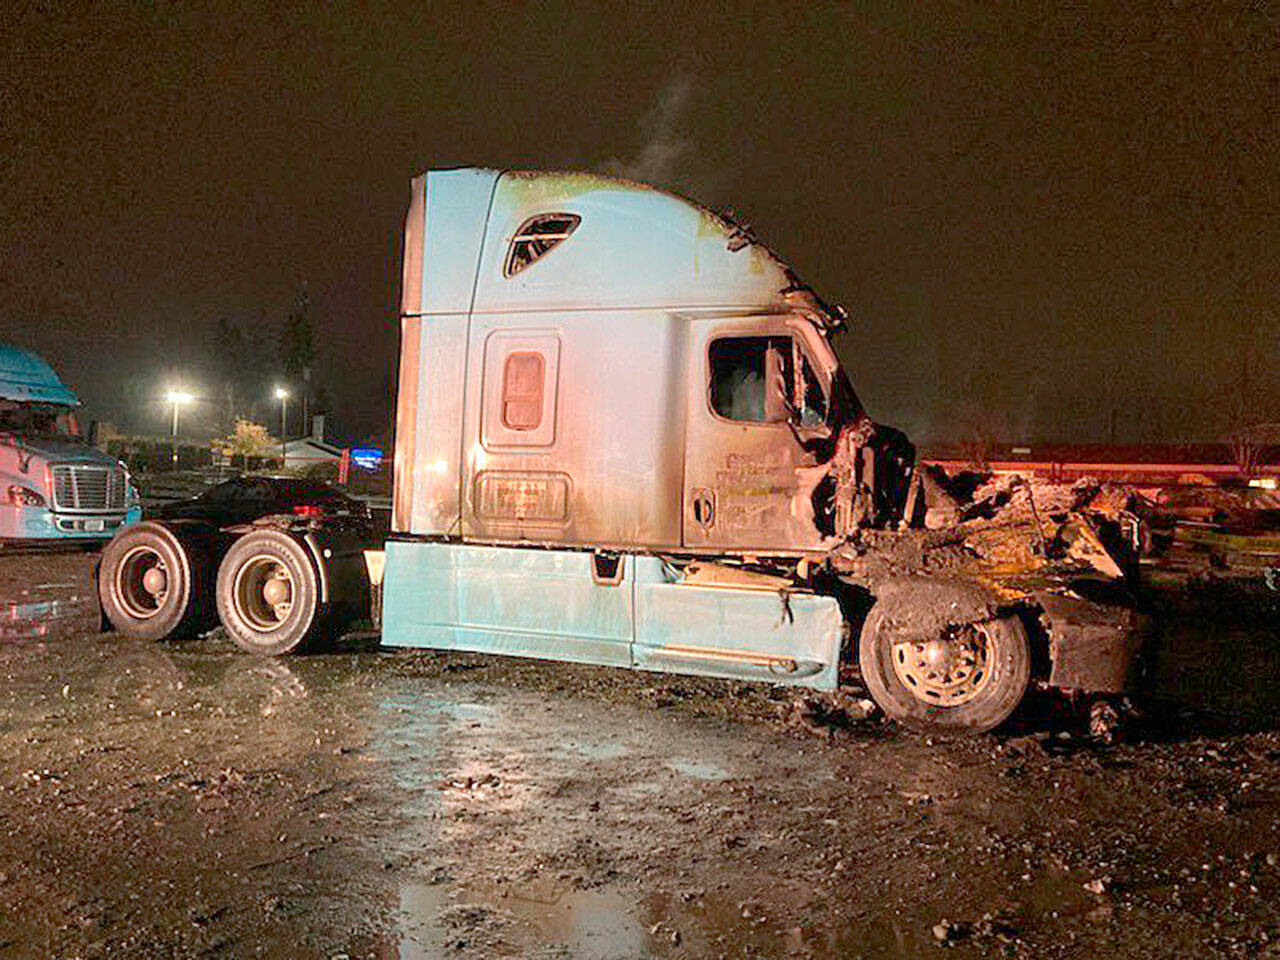 A person was found dead Tuesday night after a truck fire in south Everett has been identified as Dilbag Kaile, 60. (Everett Police Department)